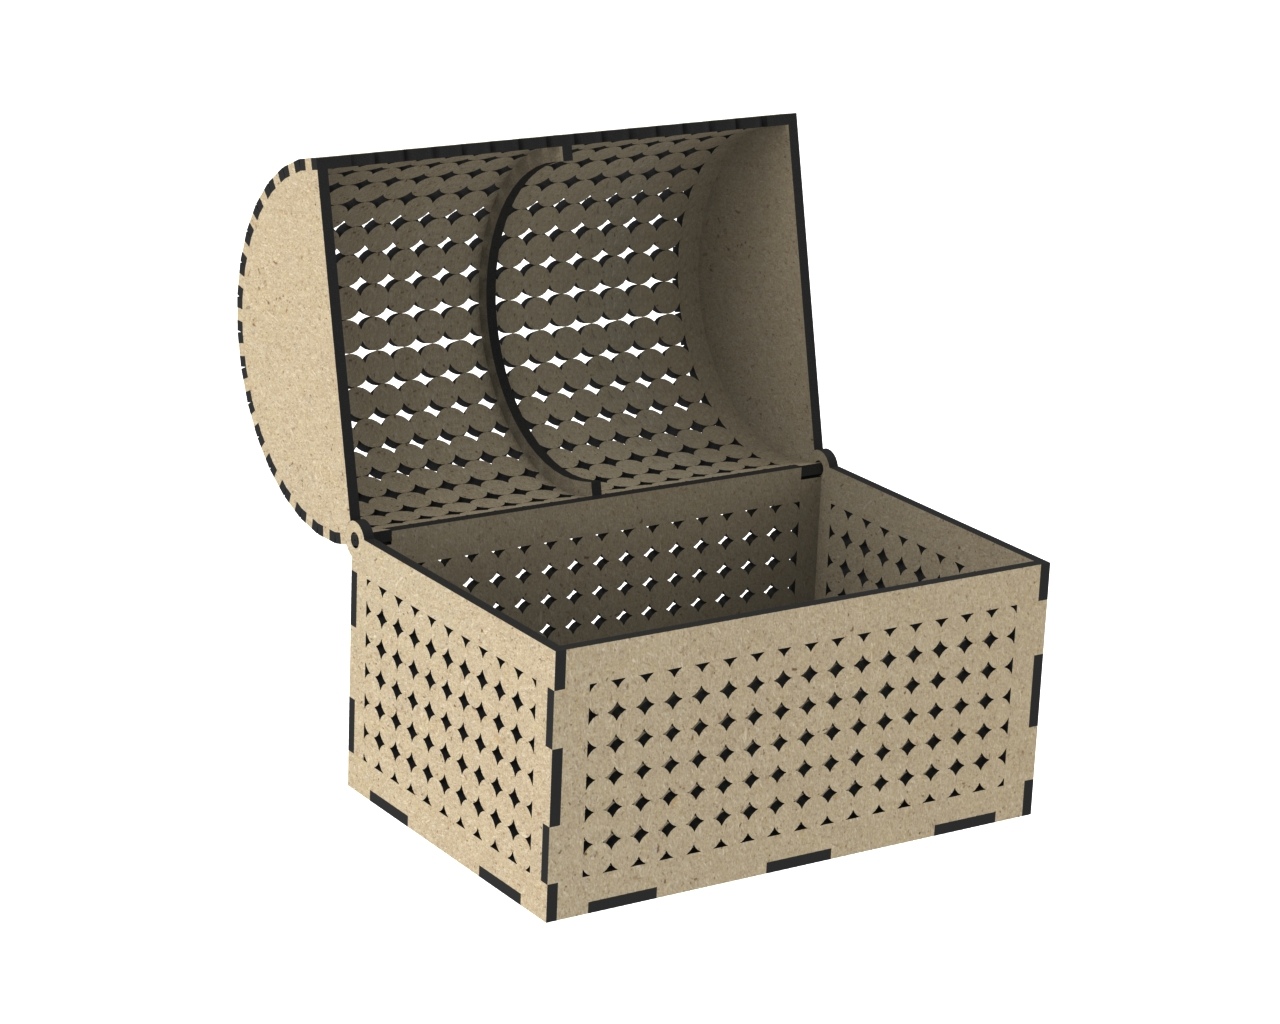 Laser Cut Wooden Chest With Decorative Lid DXF File